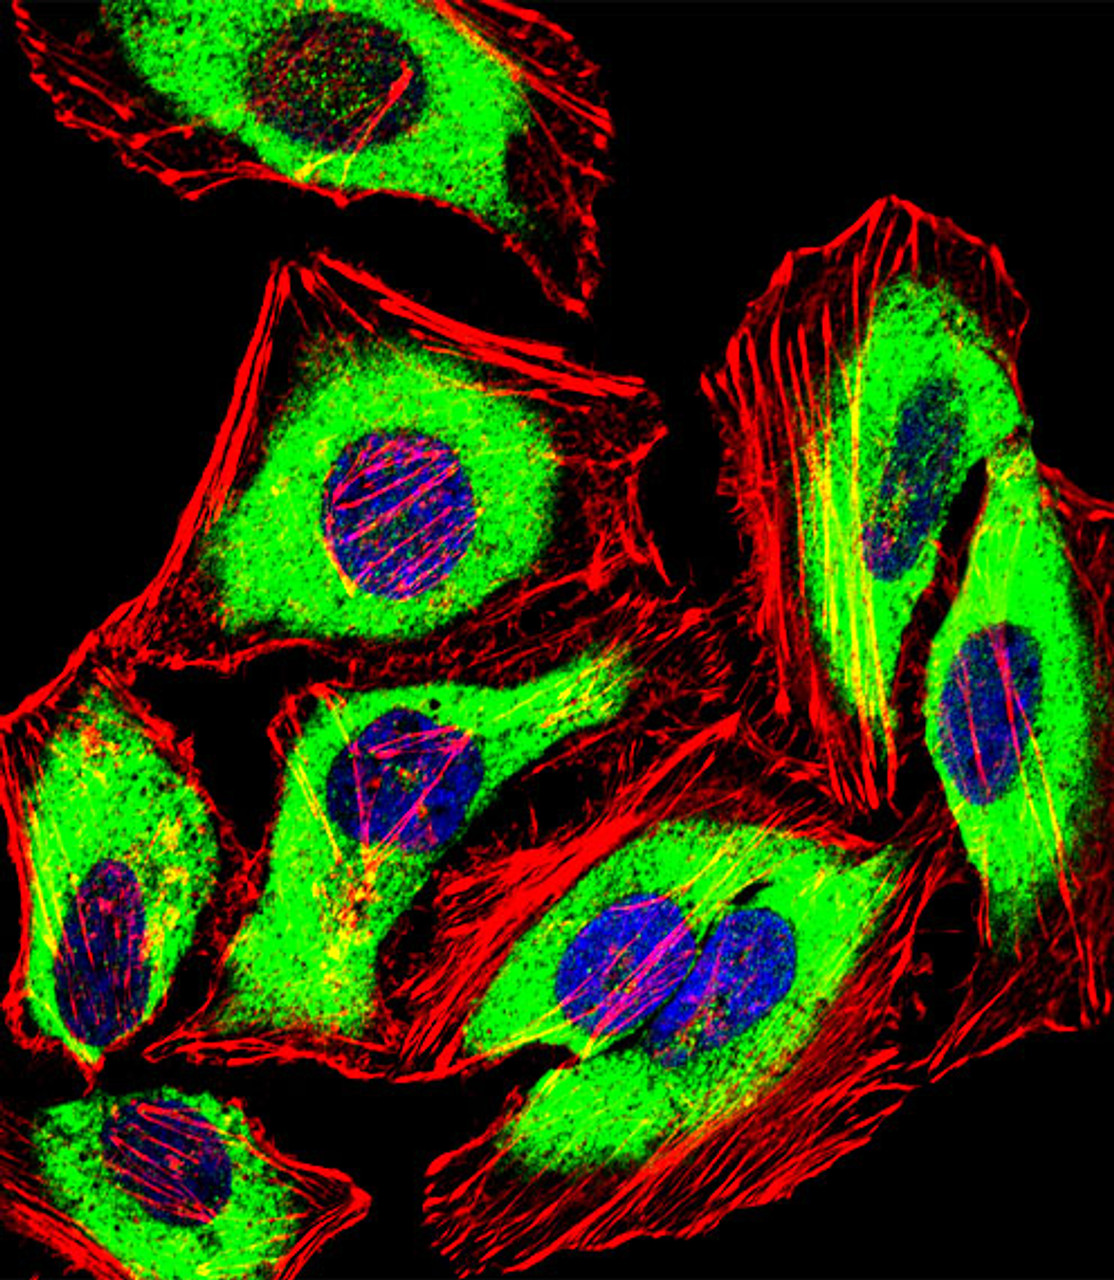 Fluorescent confocal image of Hela cell stained with PRDX2 Antibody .Hela cells were fixed with 4% PFA (20 min) , permeabilized with Triton X-100 (0.1%, 10 min) , then incubated with PRDX2 primary antibody (1:25) . For secondary antibody, Alexa Fluor 488 conjugated donkey anti-rabbit antibody (green) was used (1:400) .Cytoplasmic actin was counterstained with Alexa Fluor 555 (red) conjugated Phalloidin (7units/ml) . Nuclei were counterstained with DAPI (blue) (10 ug/ml, 10 min) .PRDX2 immunoreactivity is localized to Cytoplasm significantly.